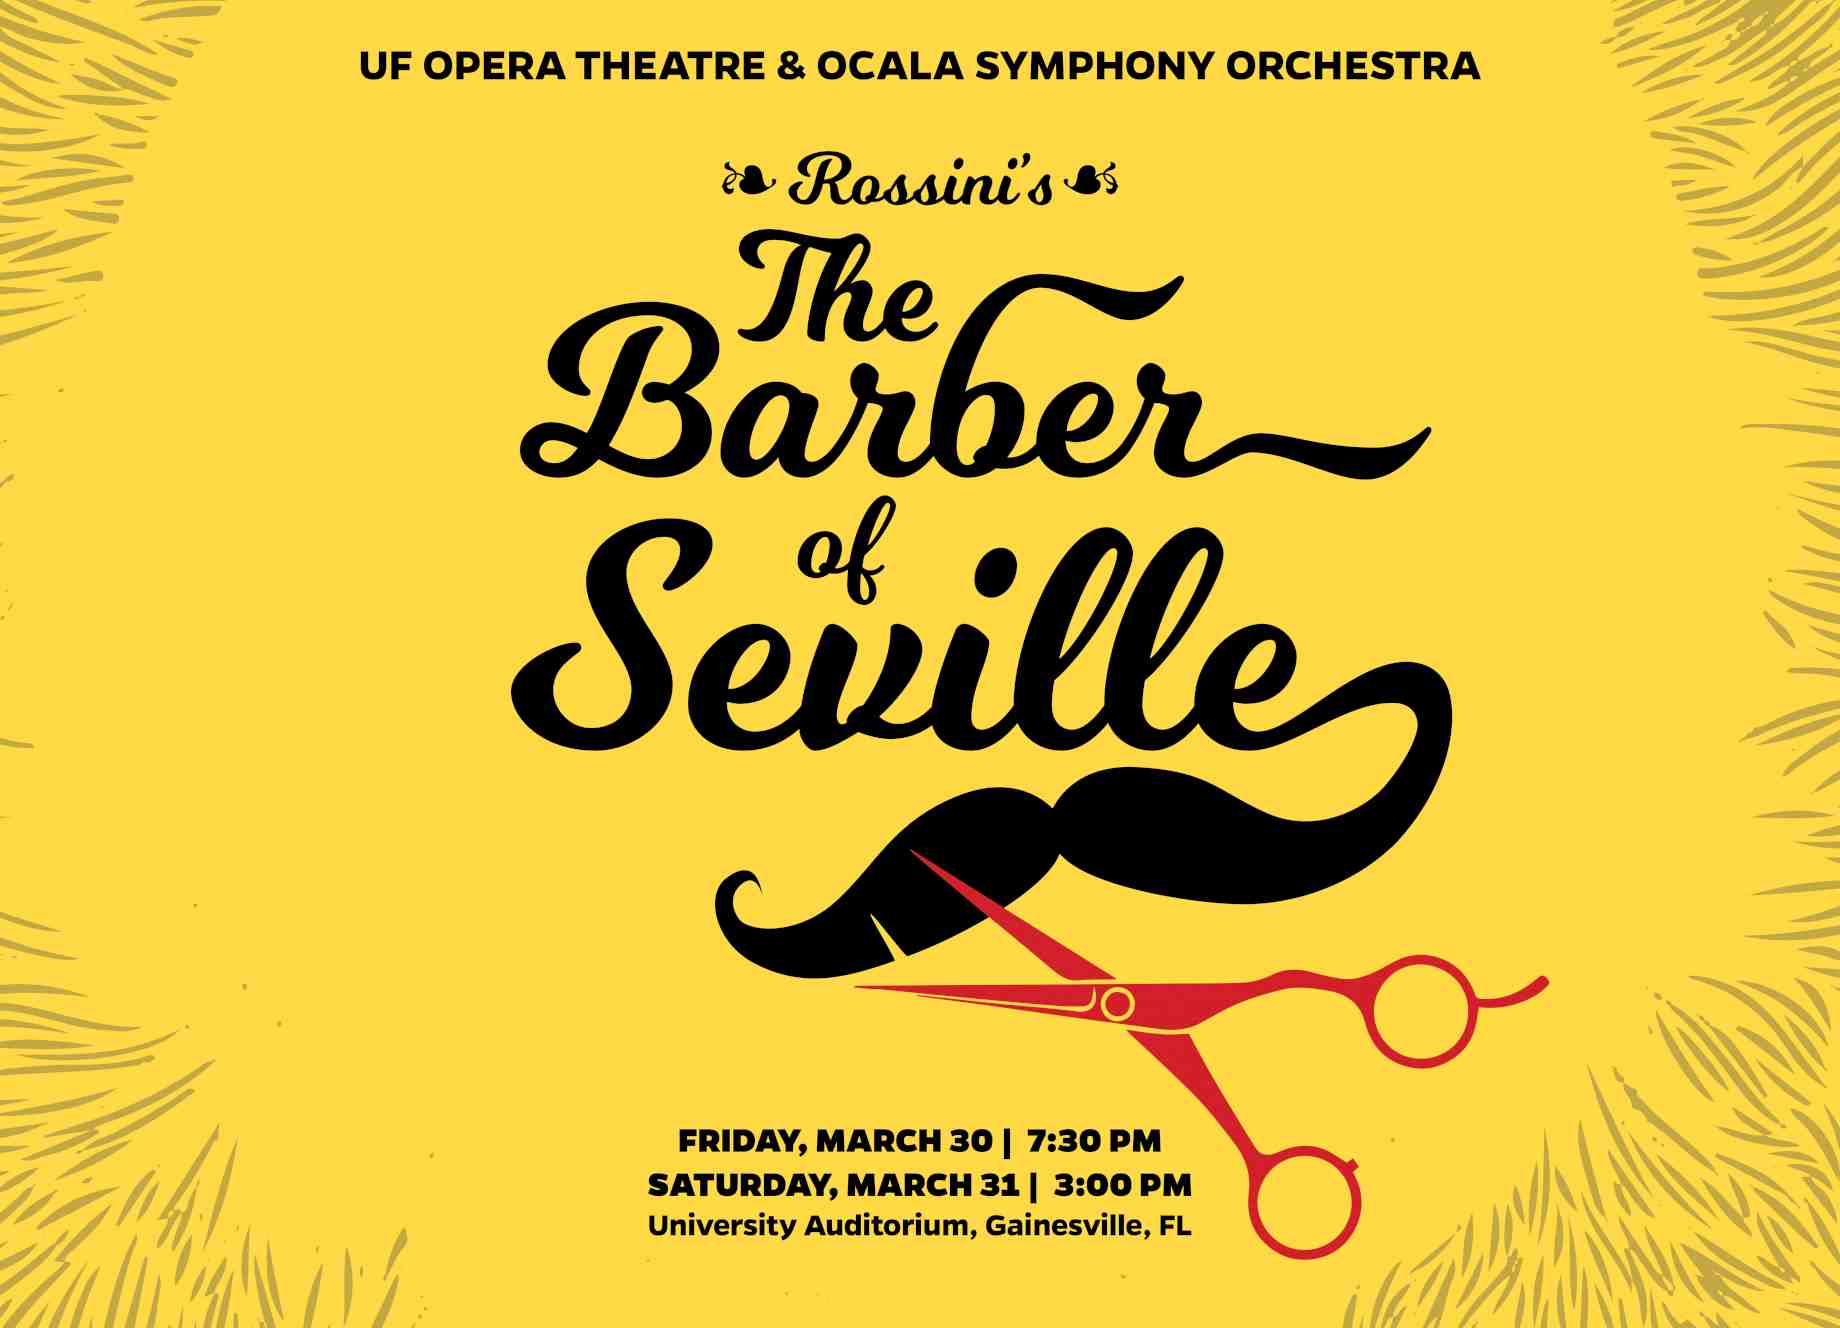 UF Opera Theatre Presents: Rossini's "The Barber of Seville" | Events | College of the Arts | University of Florida